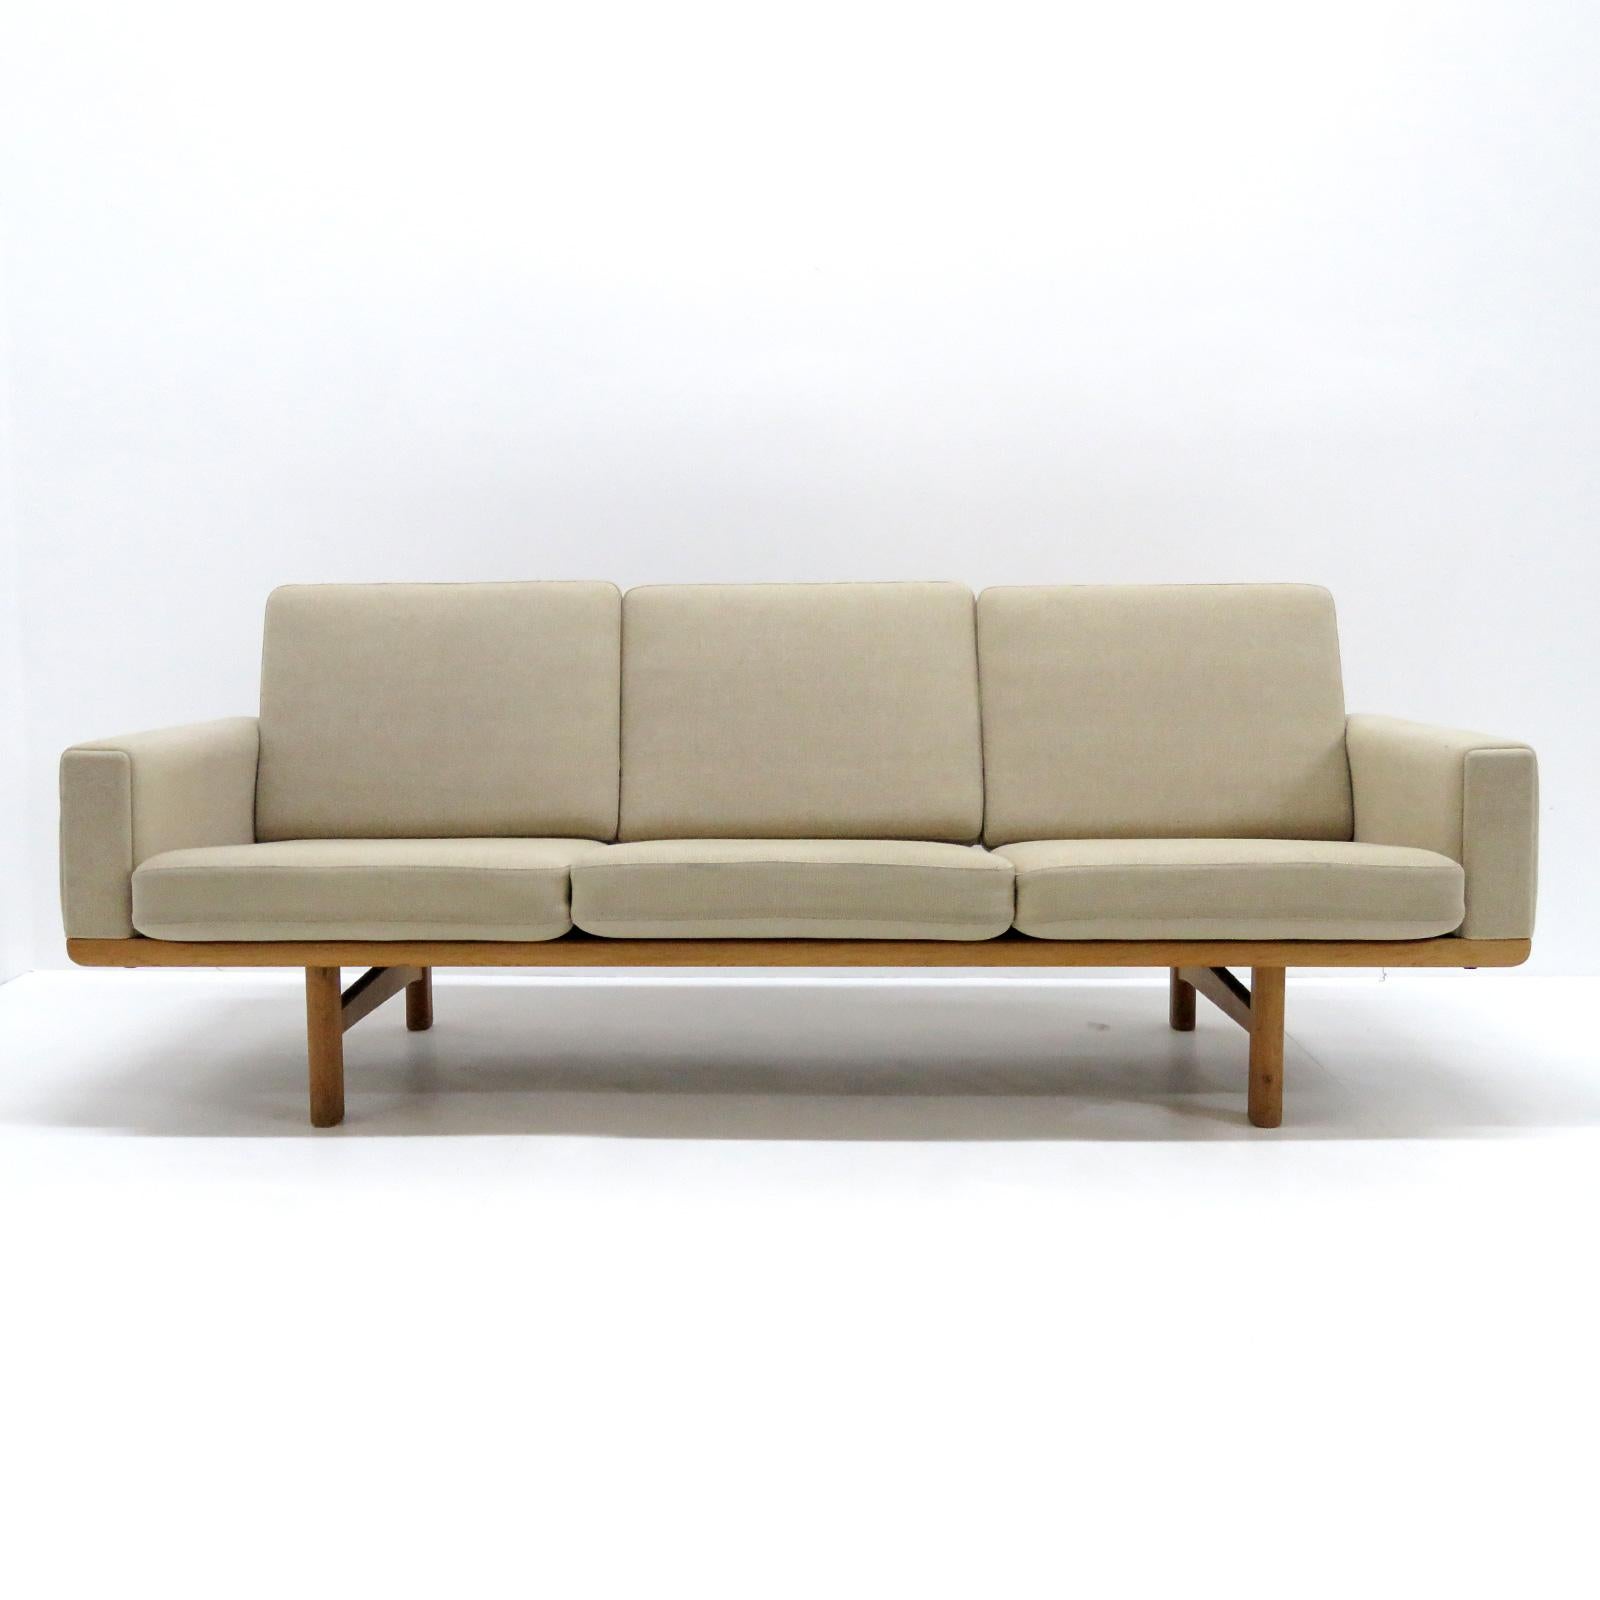 Vintage 1950s Danish three-seat sofa, model GE236/3 designed by Hans J. Wegner for GETAMA, solid oak frame with nice patina and original spring loaded cushions later reupholstered with light beige wool fabric, marked.